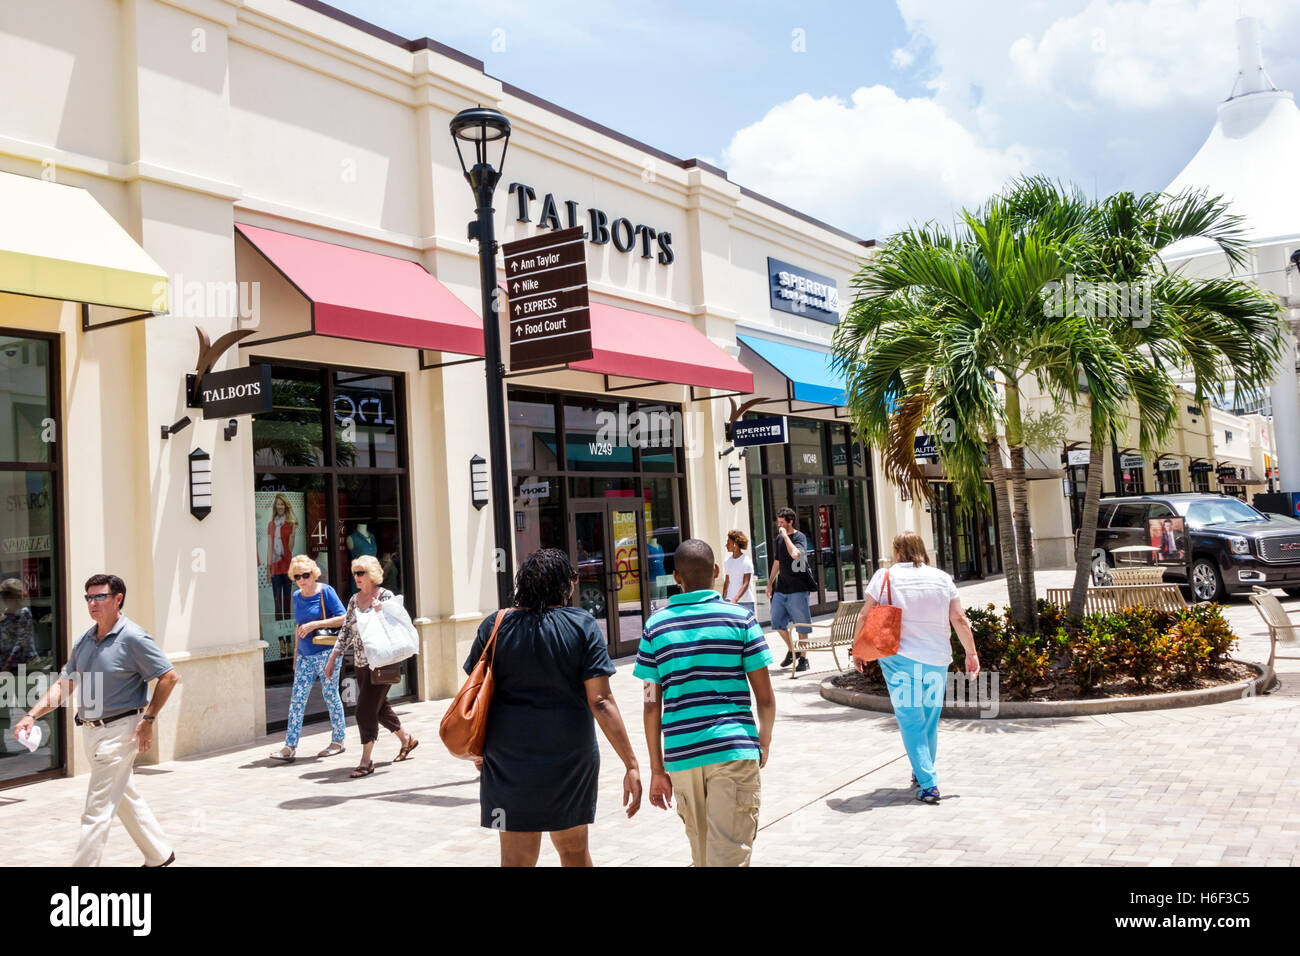 Palm Beach Florida Outlets shopping Talbots open air mall Stock Photo: 124492485 - Alamy